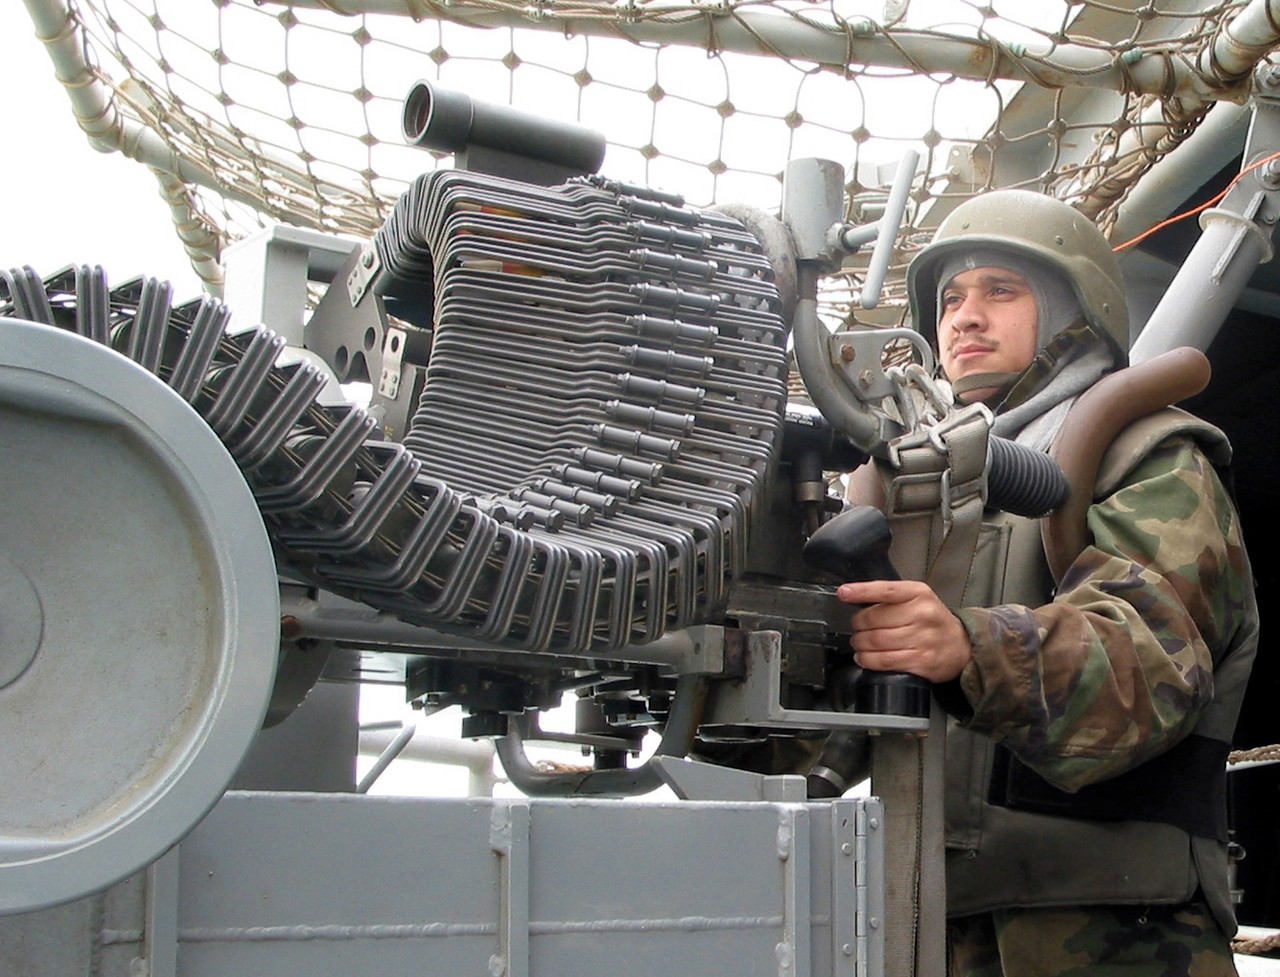 030326-N-9122P-002:   USS Tarawa (LHA-1), March 2003.    Airmen Leon Martinez III is mans an MK-38 machine gun aboard the amphibious assault ship in the Arabian Gulf, March 23, 2003.  Tarawa is deployed in support of Operation Iraqi Freedom, the multinational coalition effort to liberate the Iraqi people, eliminate weapons of mass destruction and end the regime of Saddam Hussein.  Photographed by Journalist Seaman Apprentice David Perea.  Official U.S. Navy Photograph, now in the collections of the National Archives.  